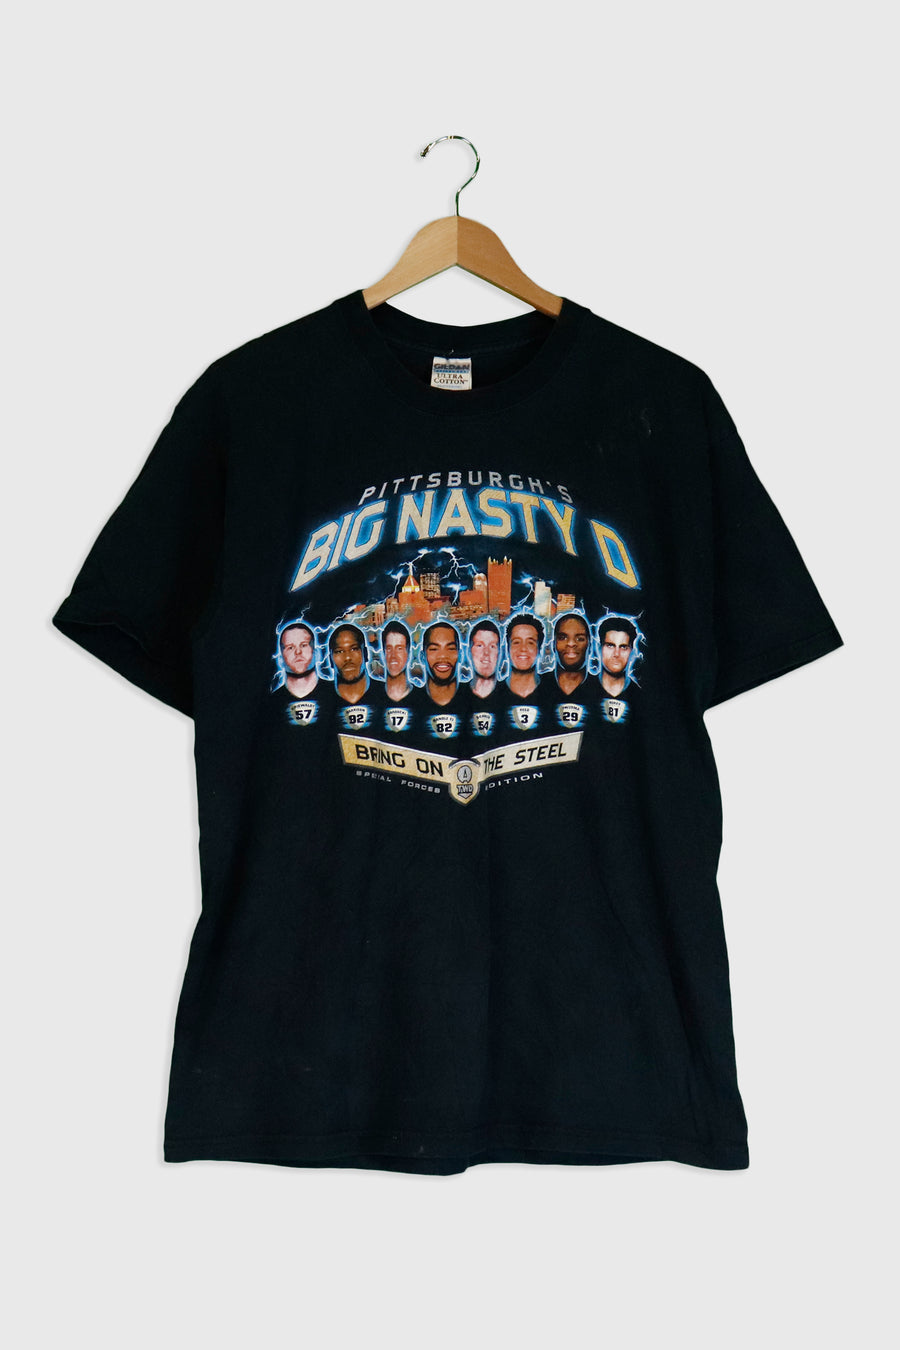 Vintage NFL Steelers Pittsburgh's Big Nasty D Special Forces Edition T Shirt Sz L